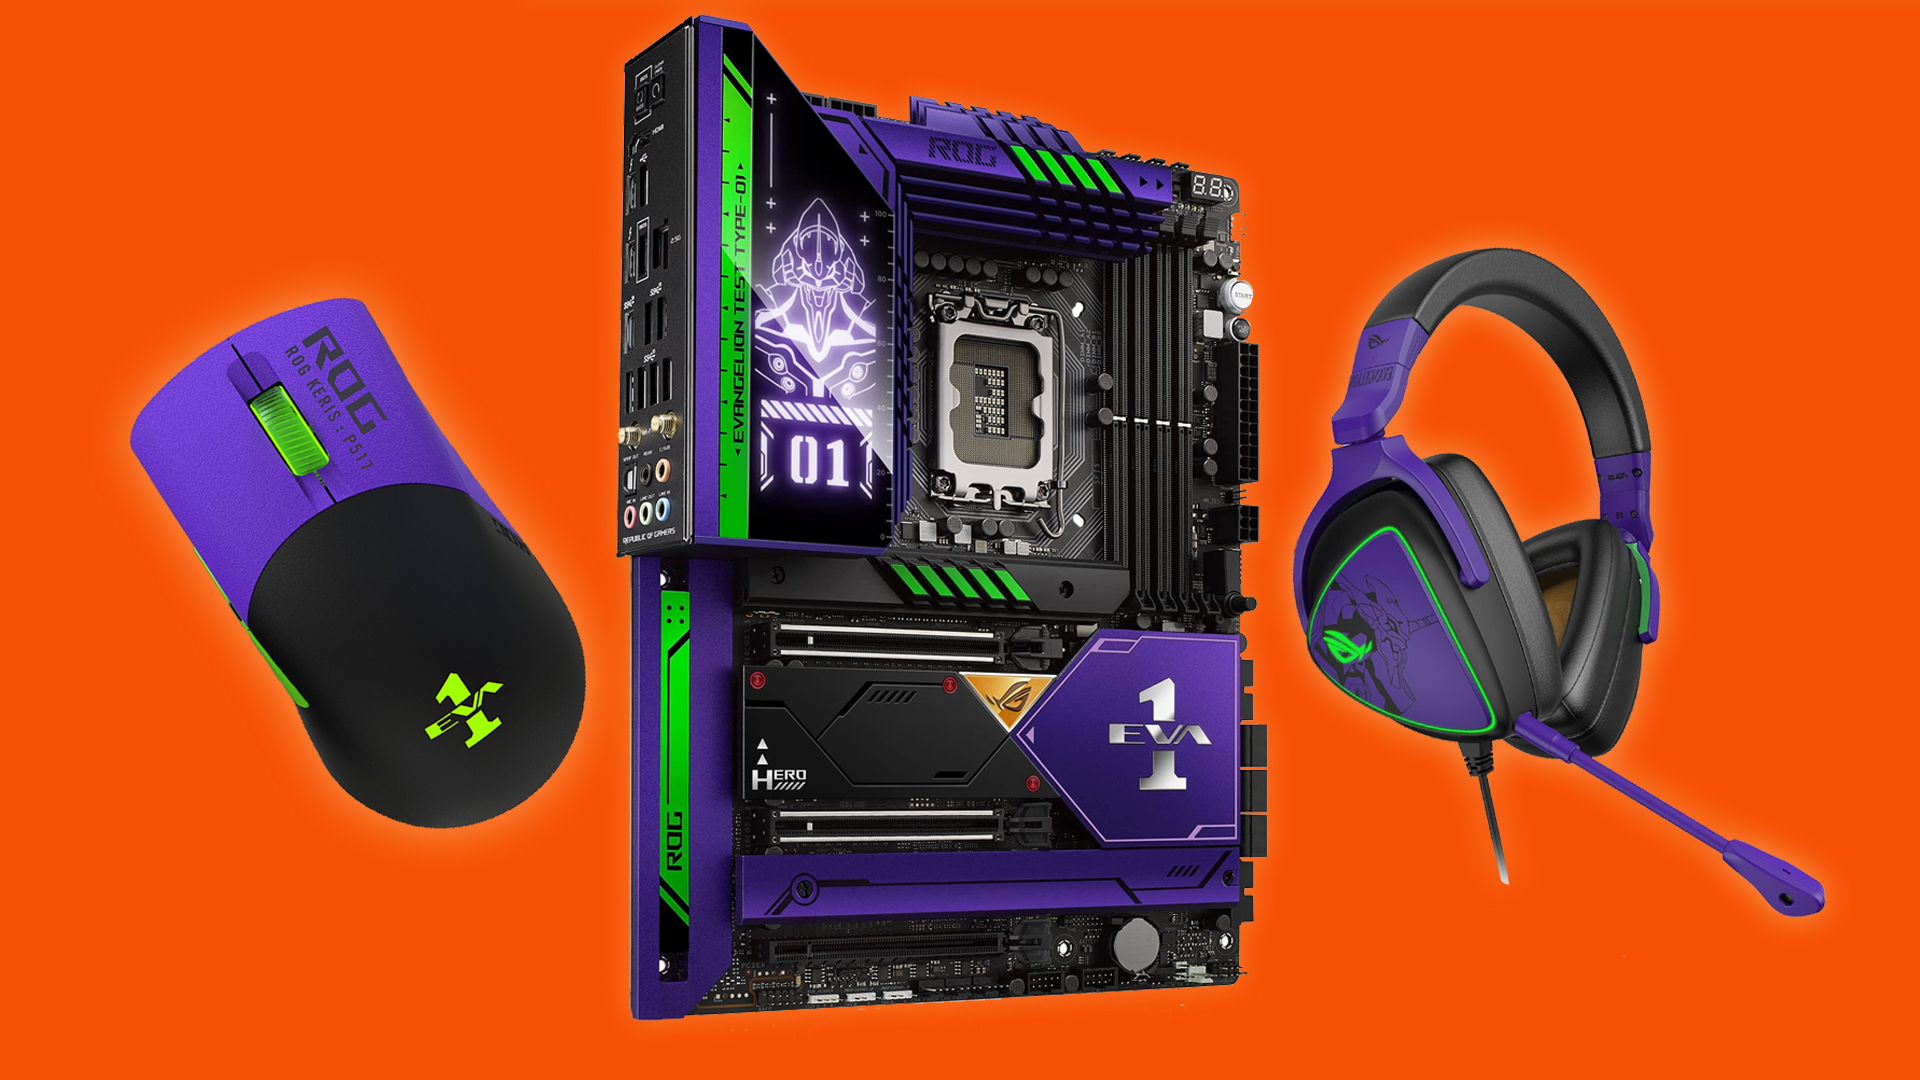 Grab the ASUS ROG Evangelion collection for cheap via Amazon Prime Day